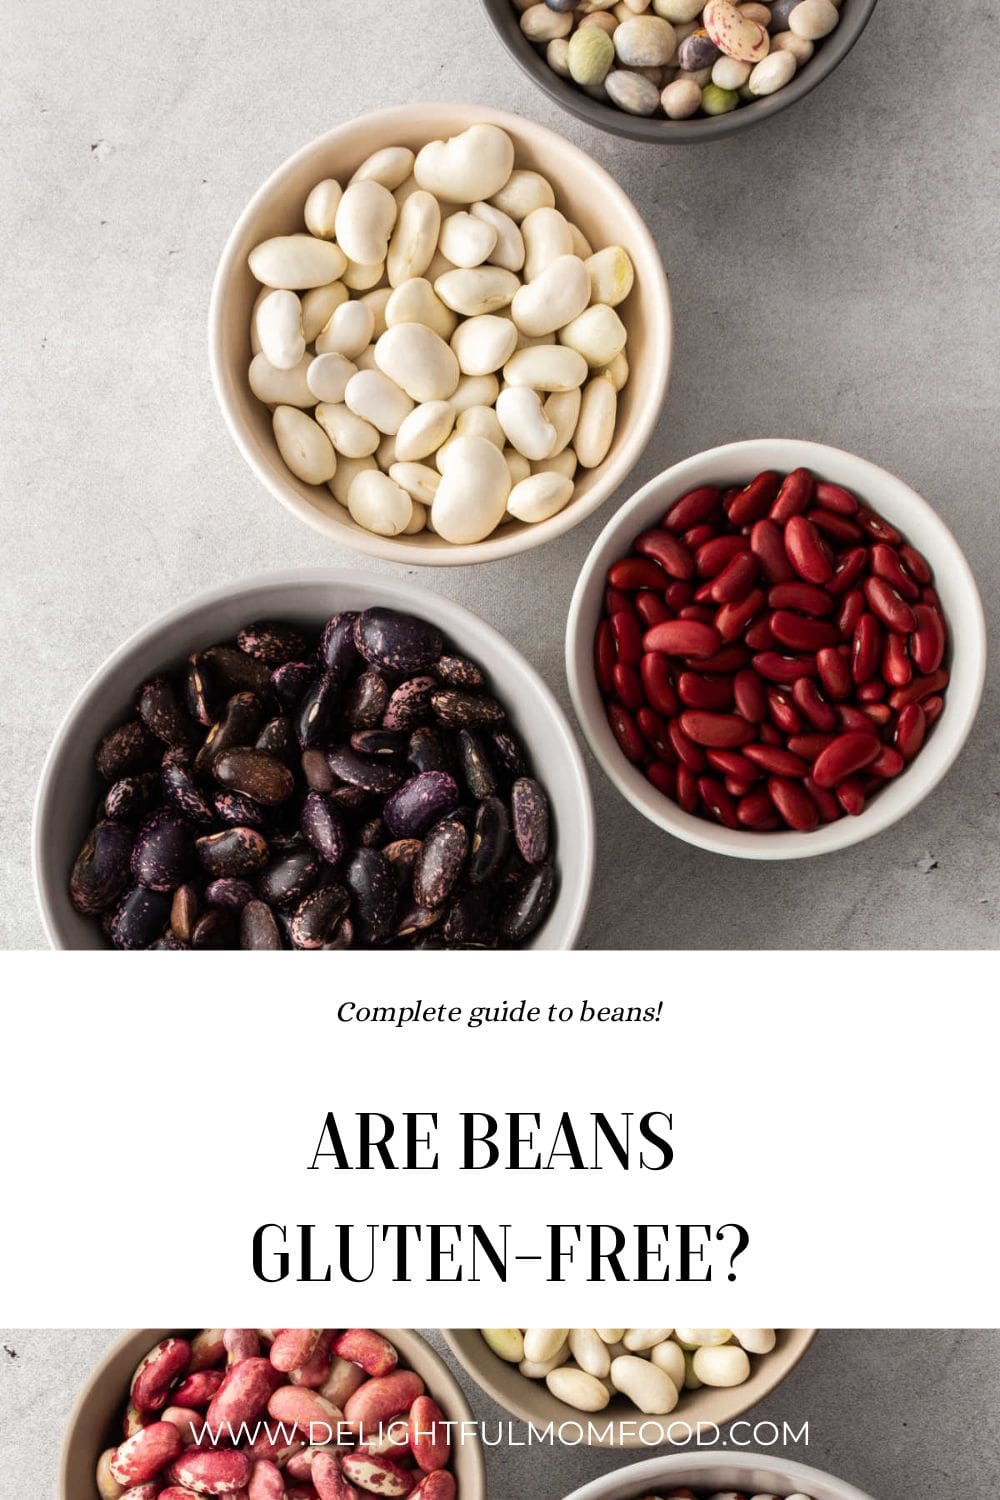 beans in a bowl showing what kind of beans are gluten free